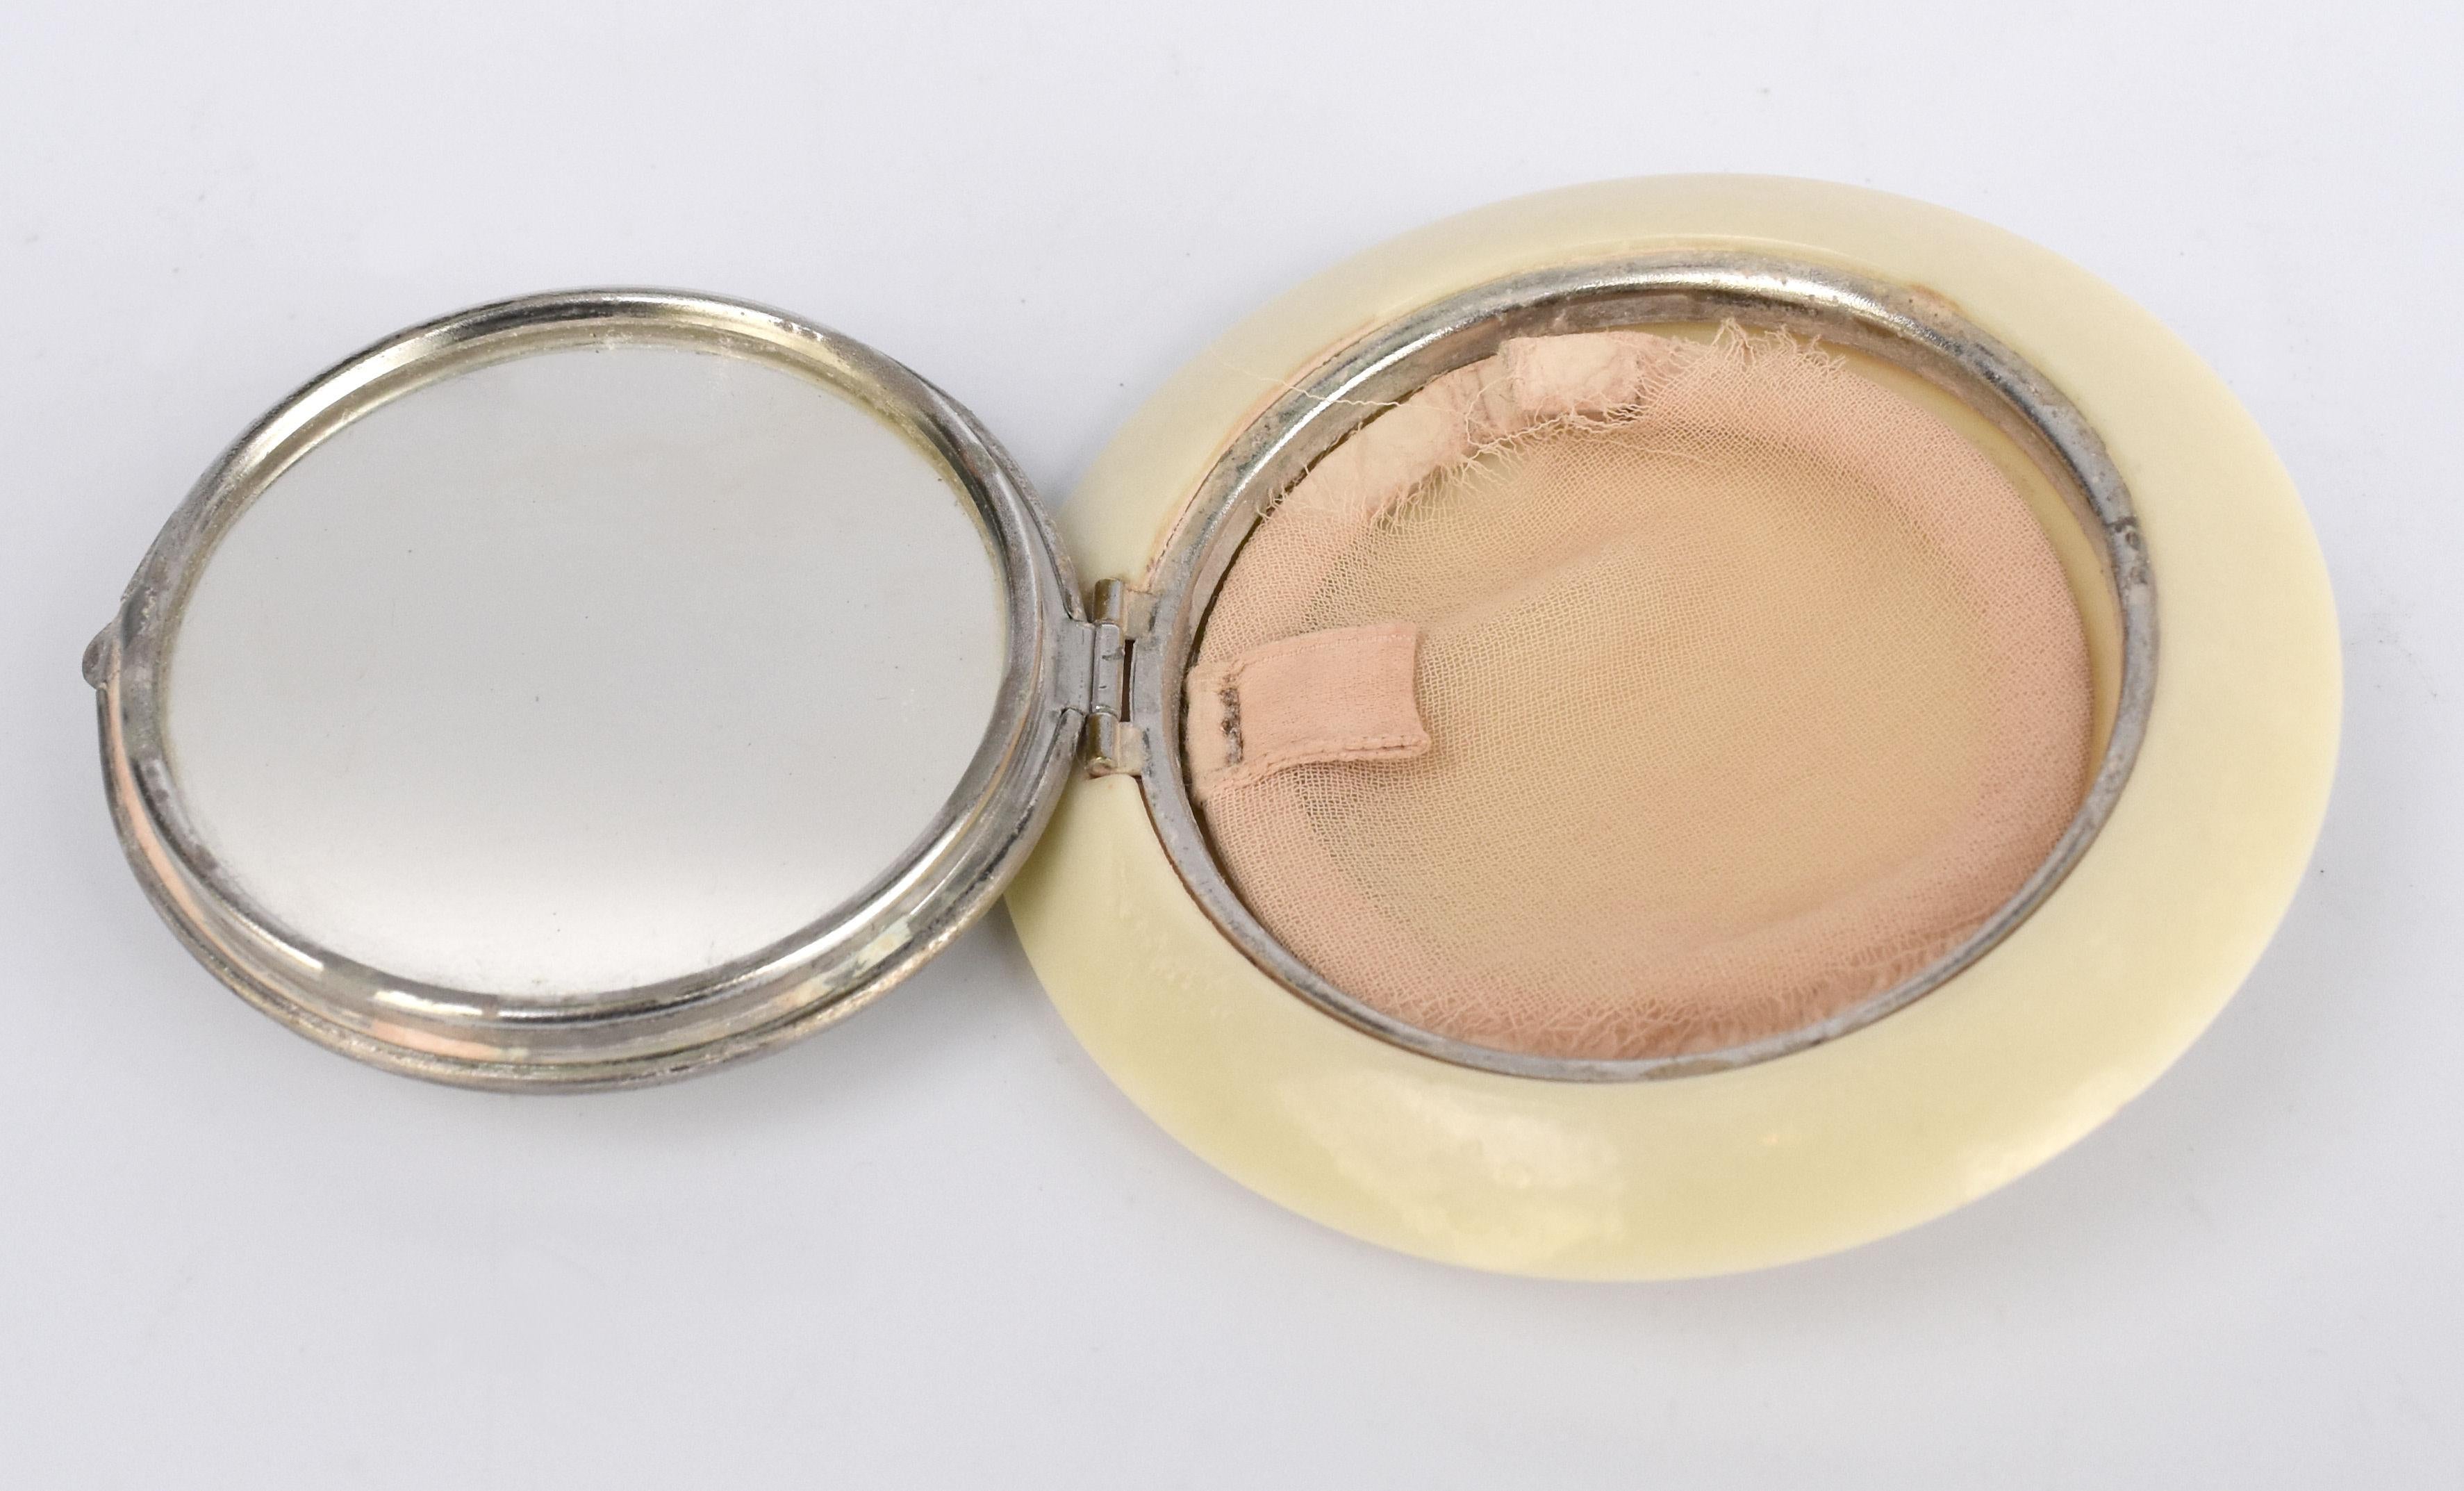 For your consideration is this delightful ladies powder Art Deco compact made from bakelite . This is a genuine Art Deco item, not a modern reproduction. This smooth round compact is very tactile and has a lovely applied decoration of a Scottish